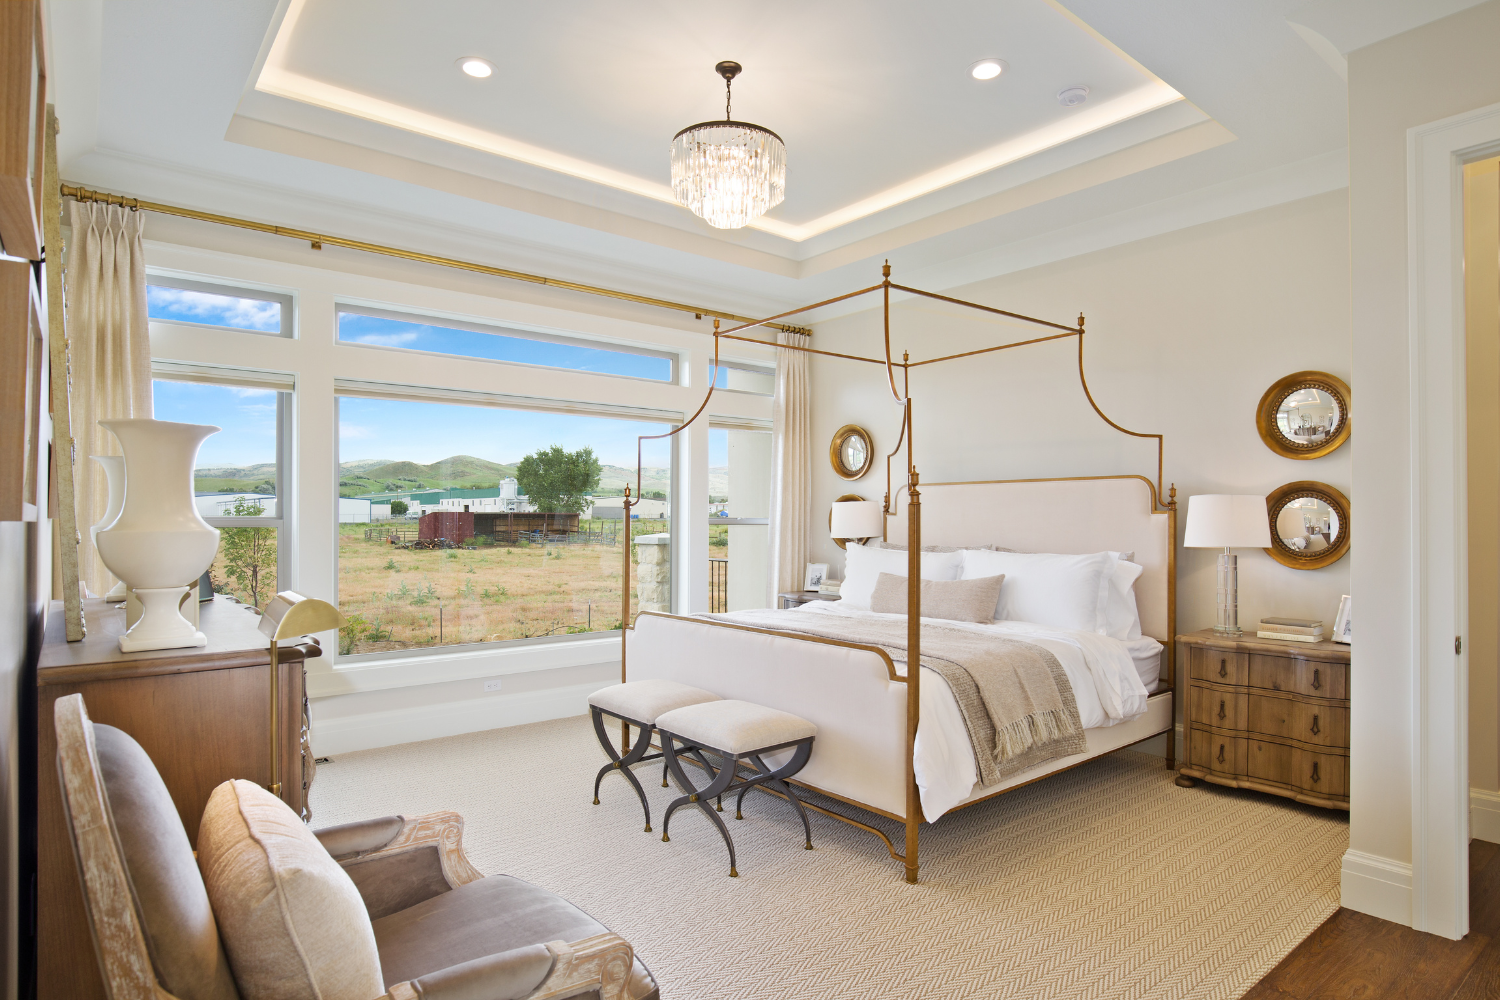 pamela-sandall-los-angeles-ca-how-to-stage-a-primary-bedroom-elegant-bedroom-with-vaulted-ceiling-and-canopy-bed